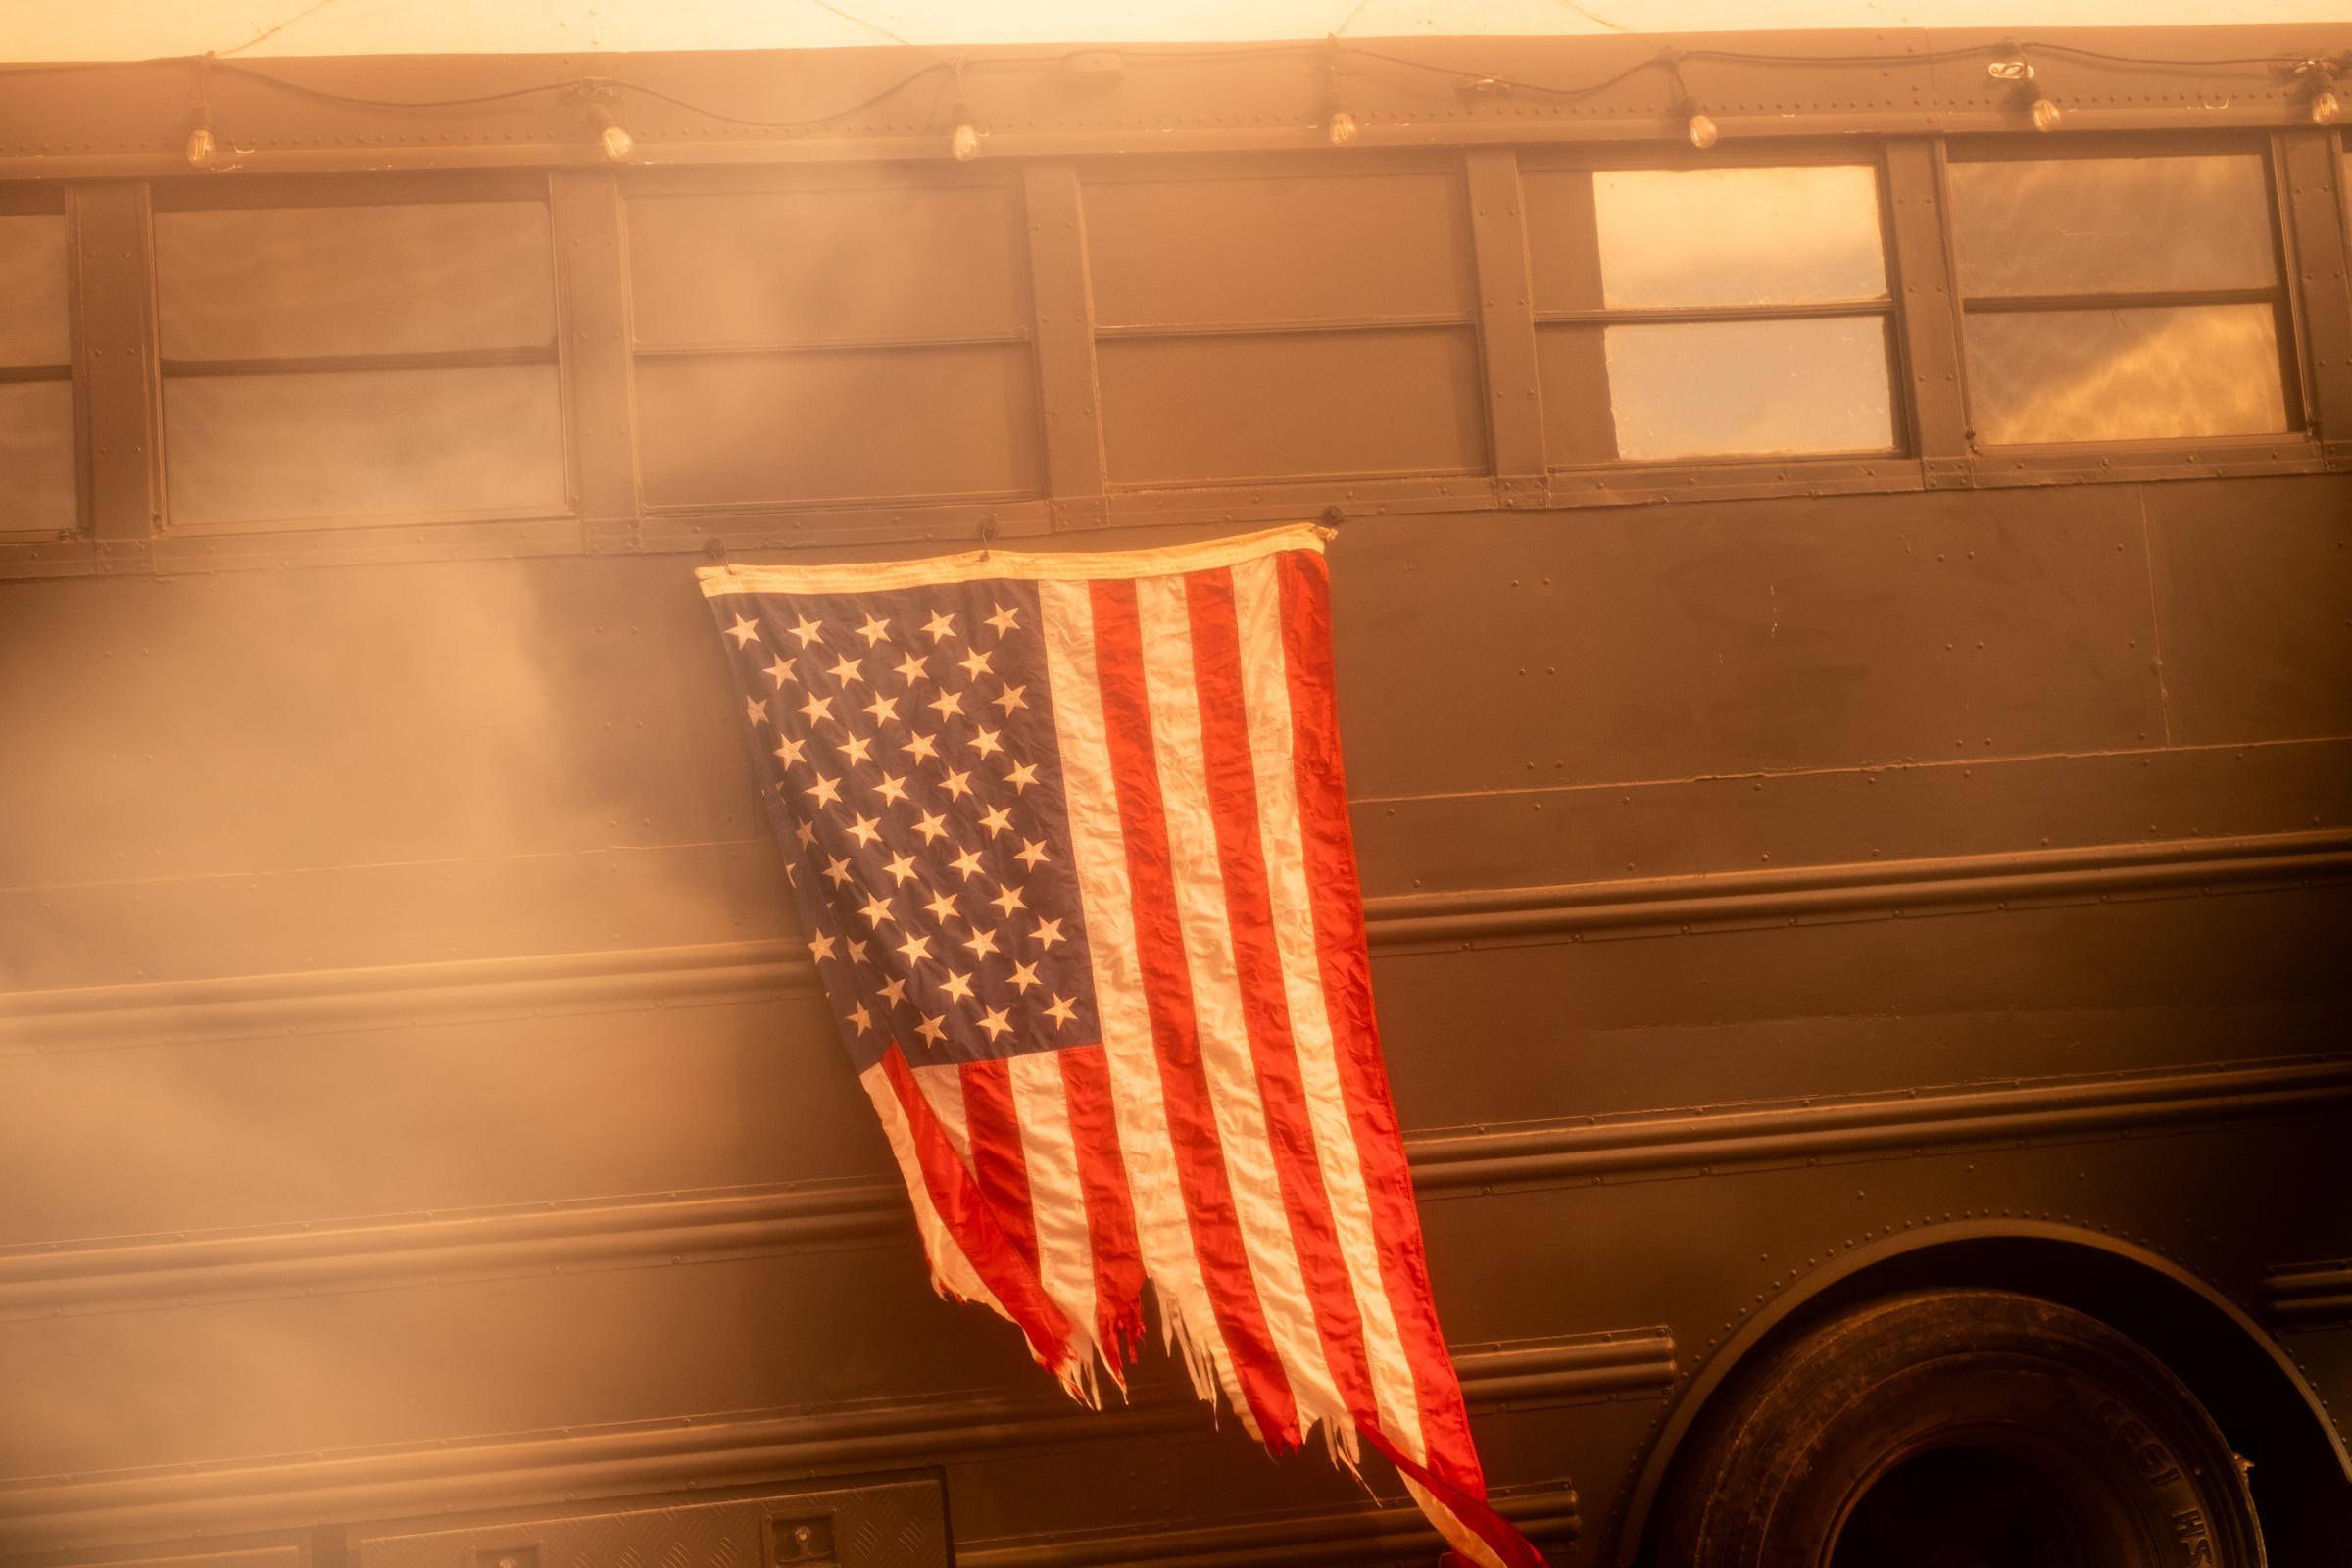 A Warm Winter (An Ongoing Journey) - An American flag I saw outside someone's rig in...